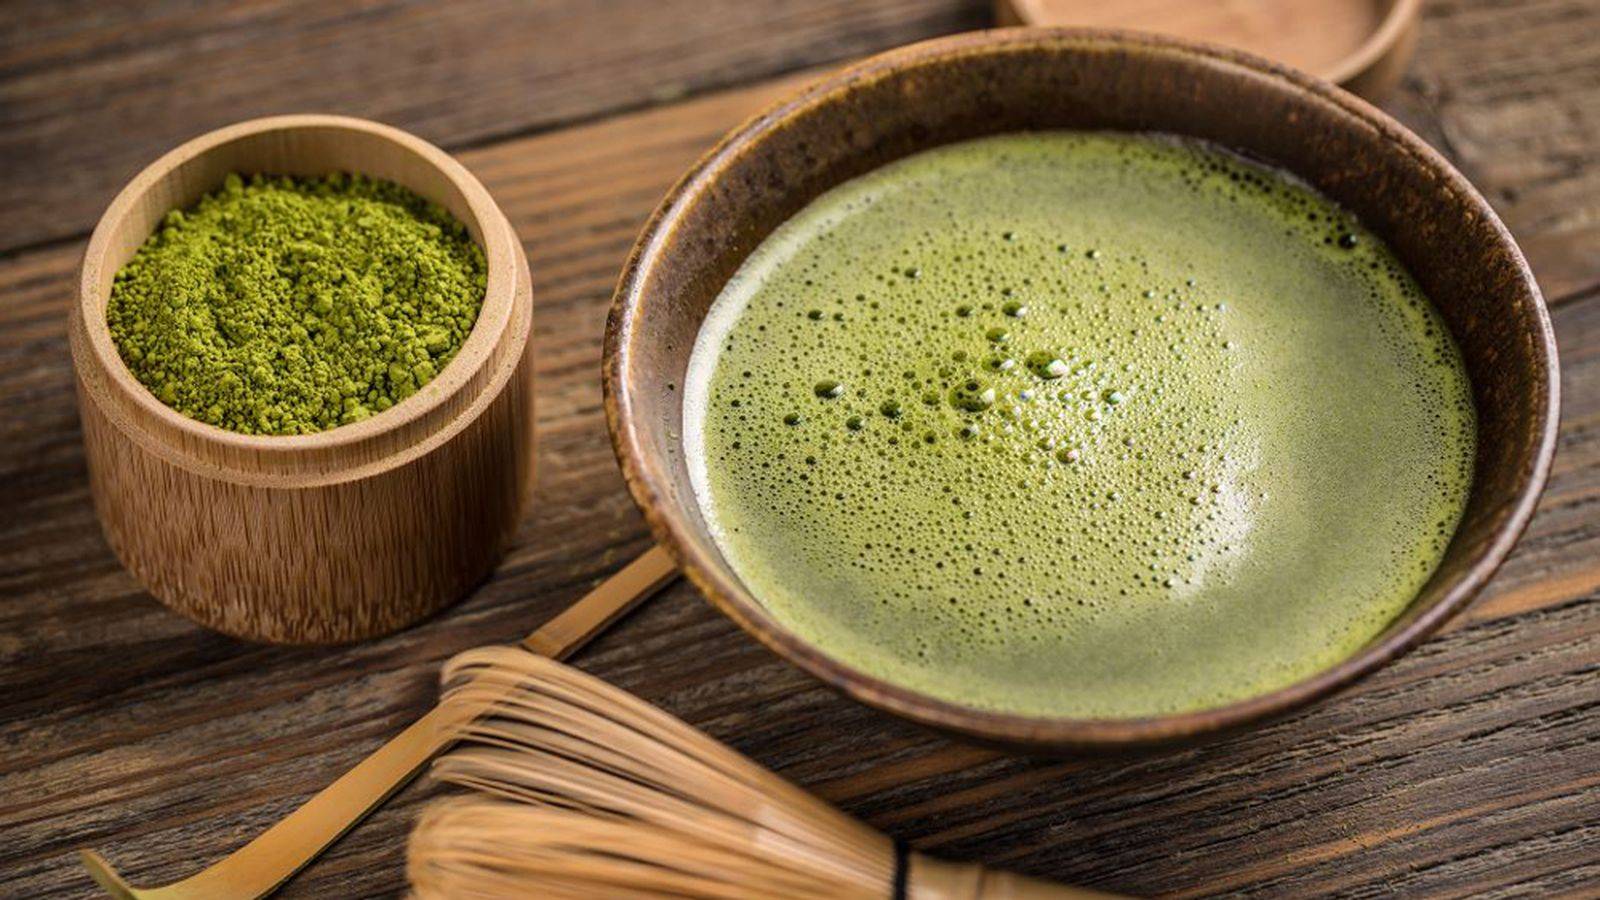 Kyoto Matcha: The Finest Green Tea from Japan's Ancient Capital